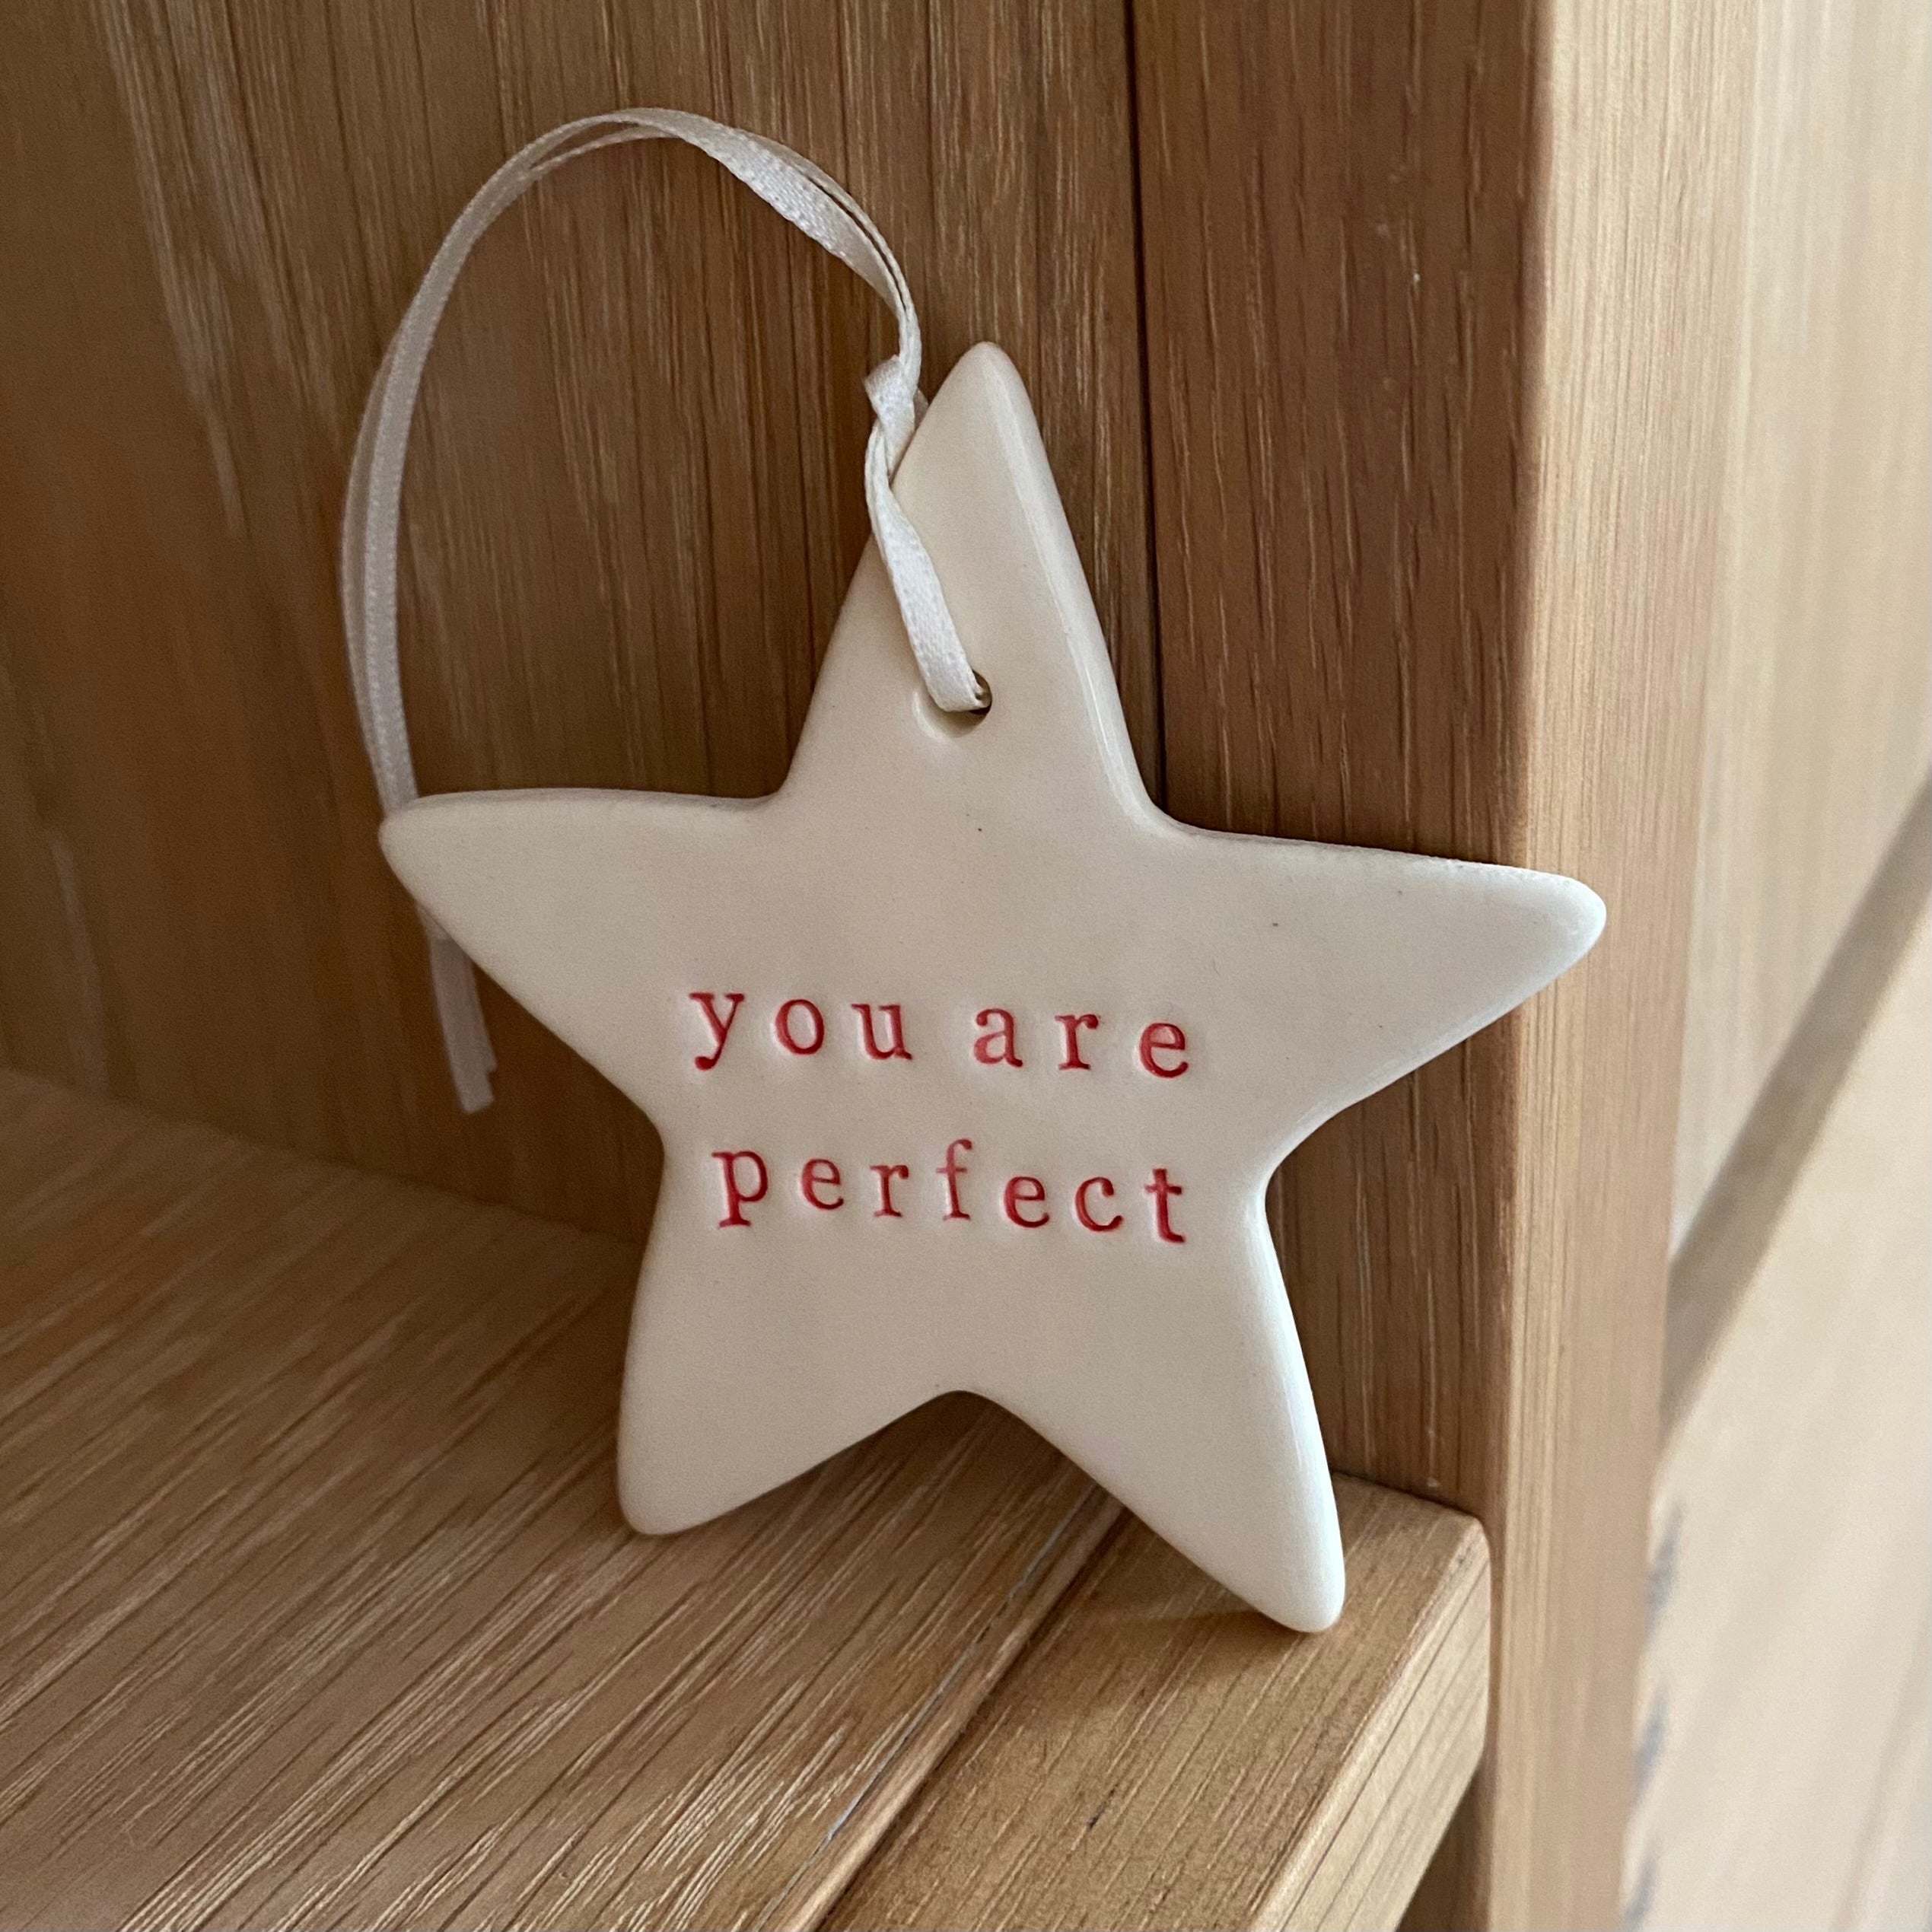 Paper Boat Press poinsettia with words - you are perfect